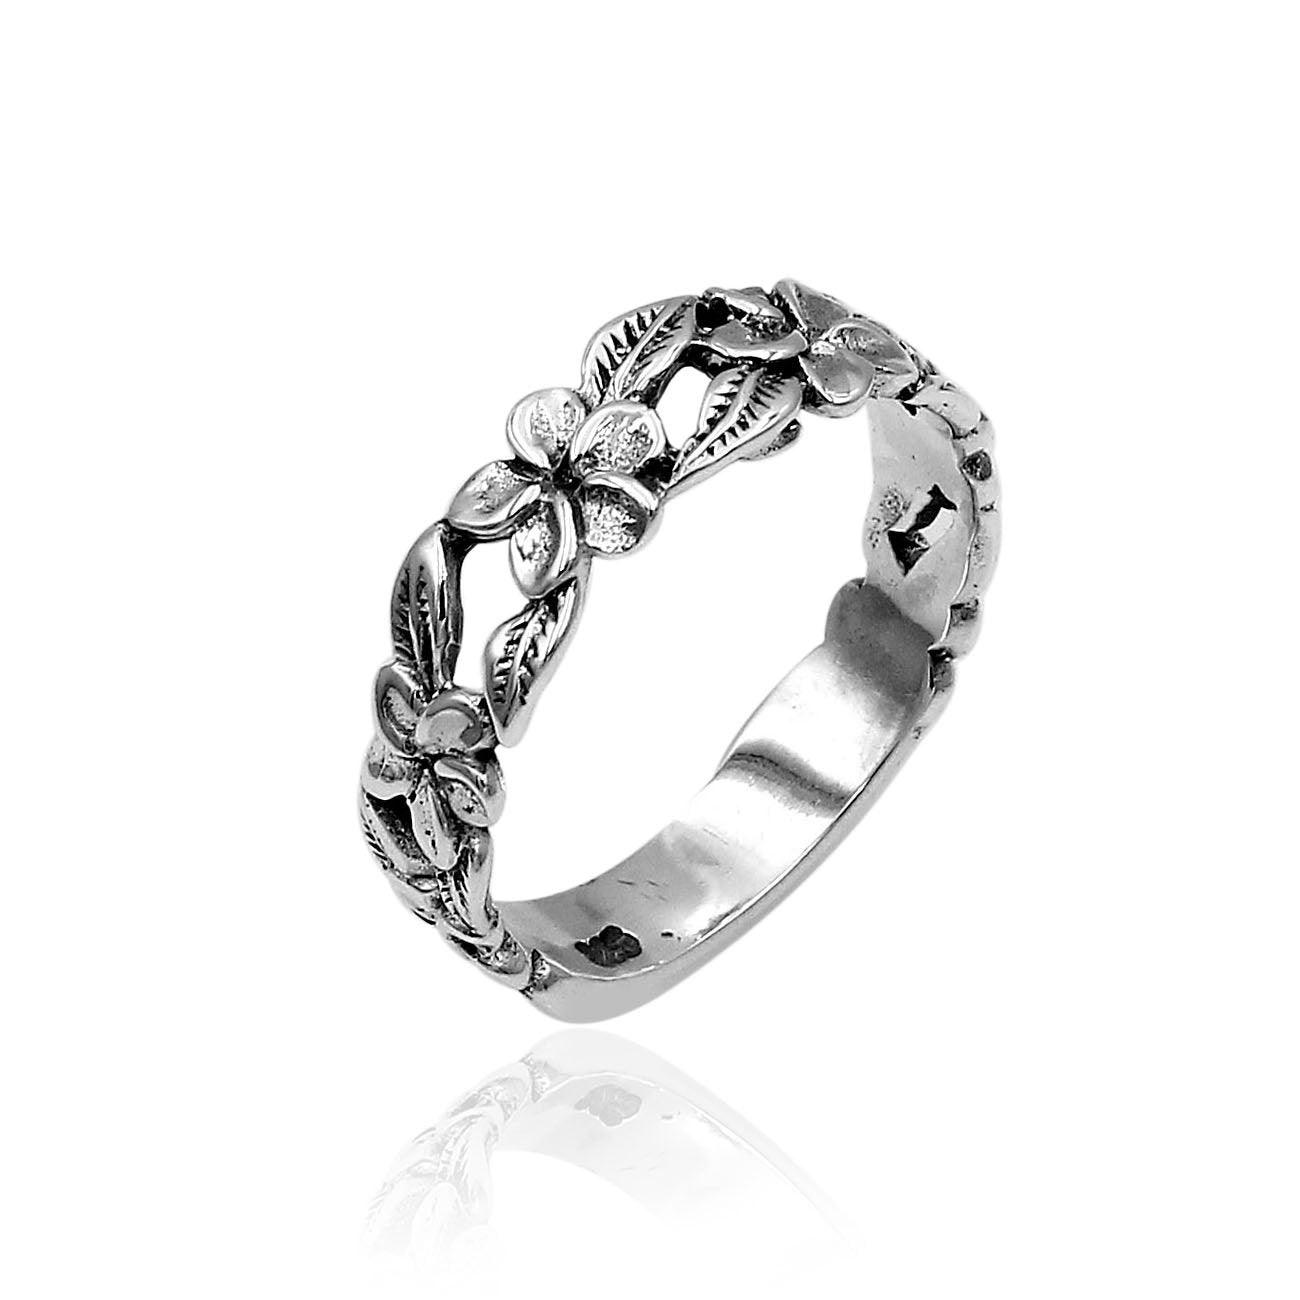 Handmade BALI Frangipani Floral BAND Ring in 925 Sterling Silver - Size L , M , N , O , P , Q - Inspiring Jewellery